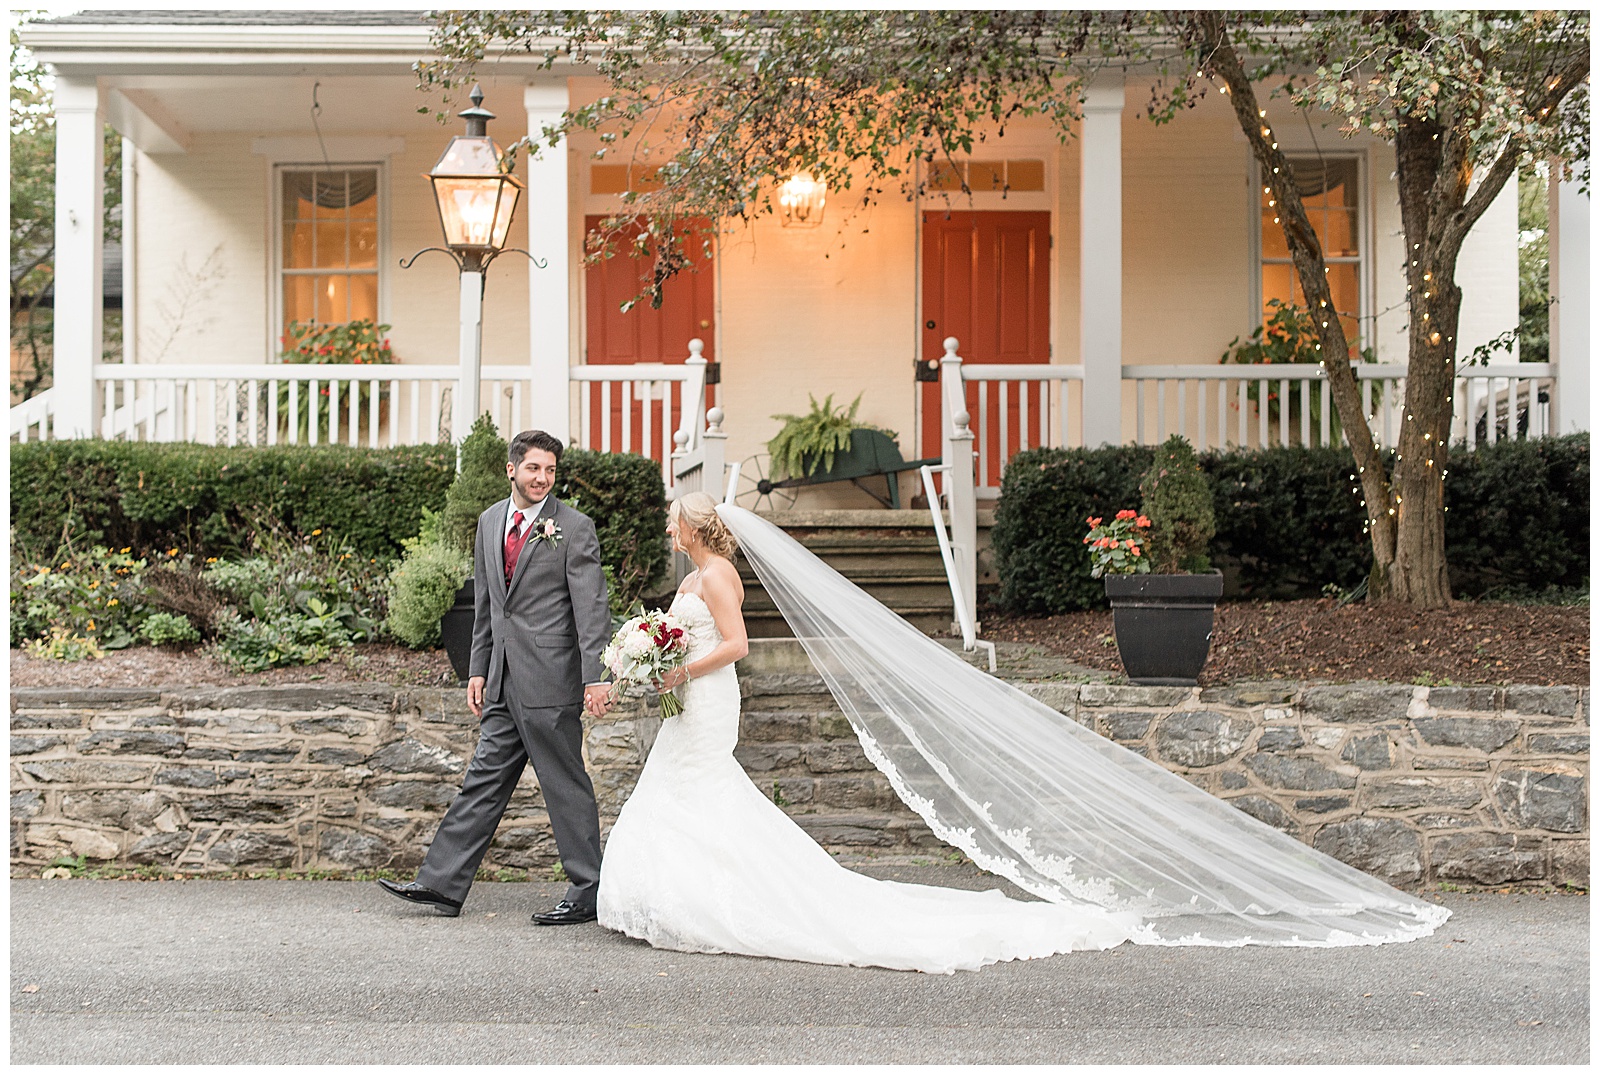 couple is walking on paved driveway in front of white house and the groom is to the left holding the brides right hand and leading her while looking back over his shoulder at her and smiling and the bride is on the right following behind him with her dress and veil extended behind her on the driveway and she is holding her flower bouquet at Riverdale Manor in Lancaster, PA